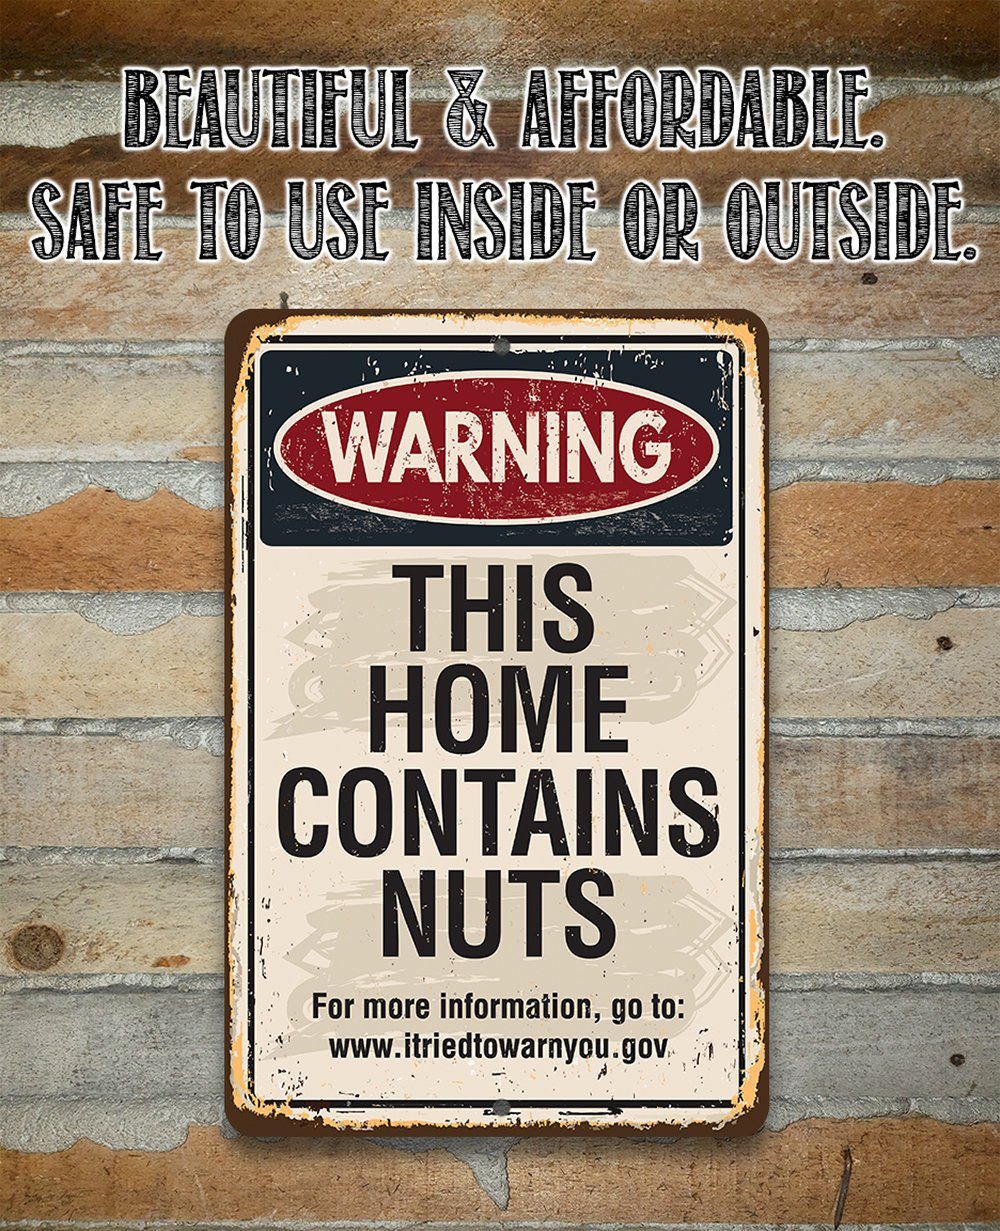 Warning This Home Contains Nuts - Metal Sign | Lone Star Art.